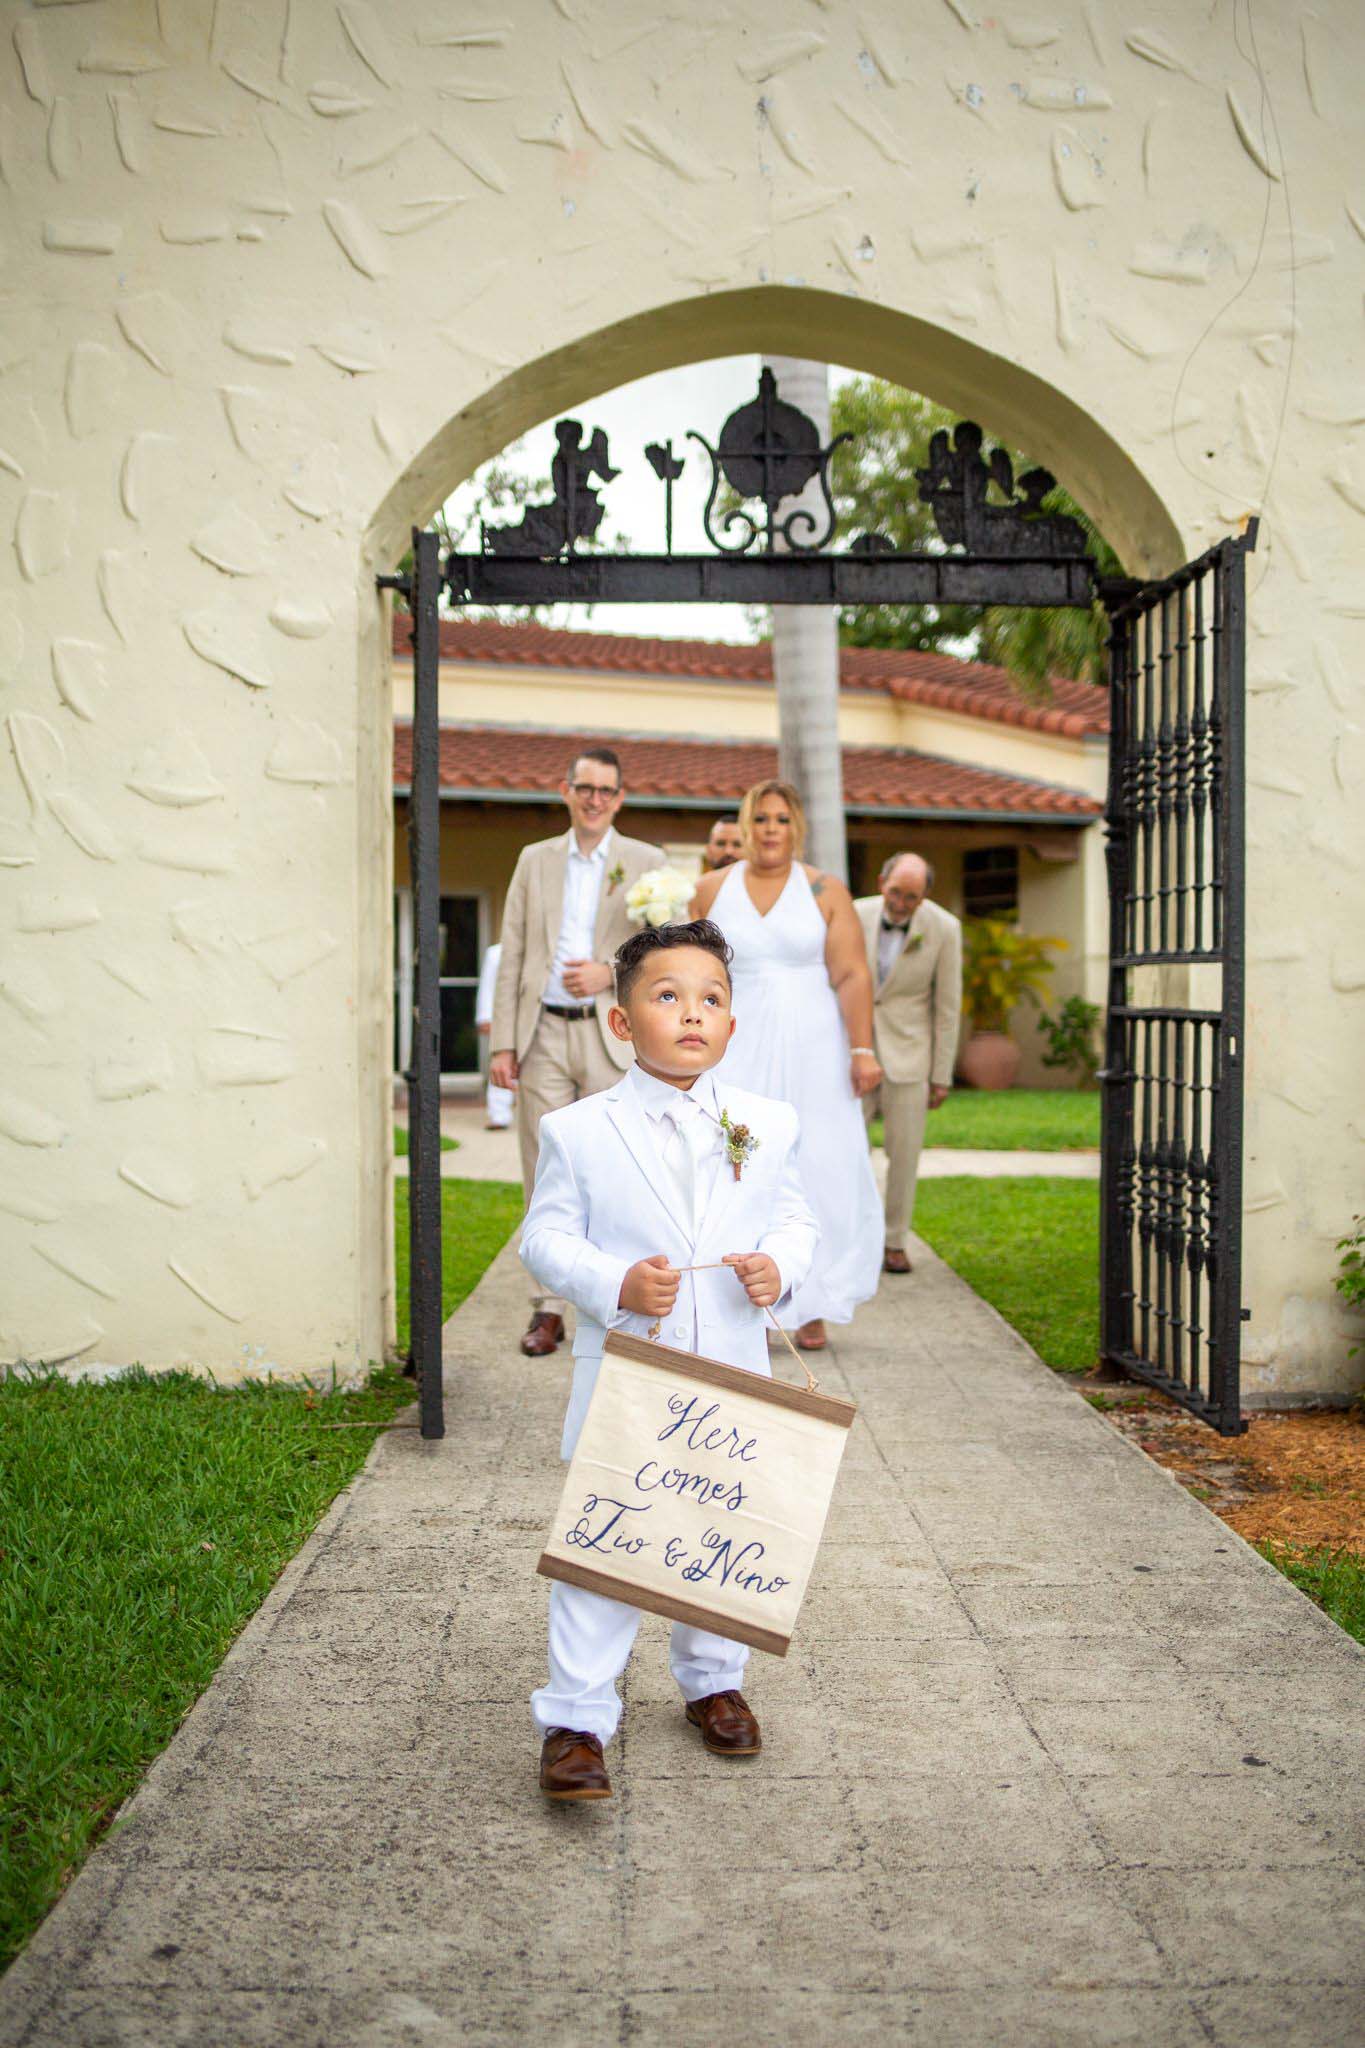 wedding procession with young boy holding a sign